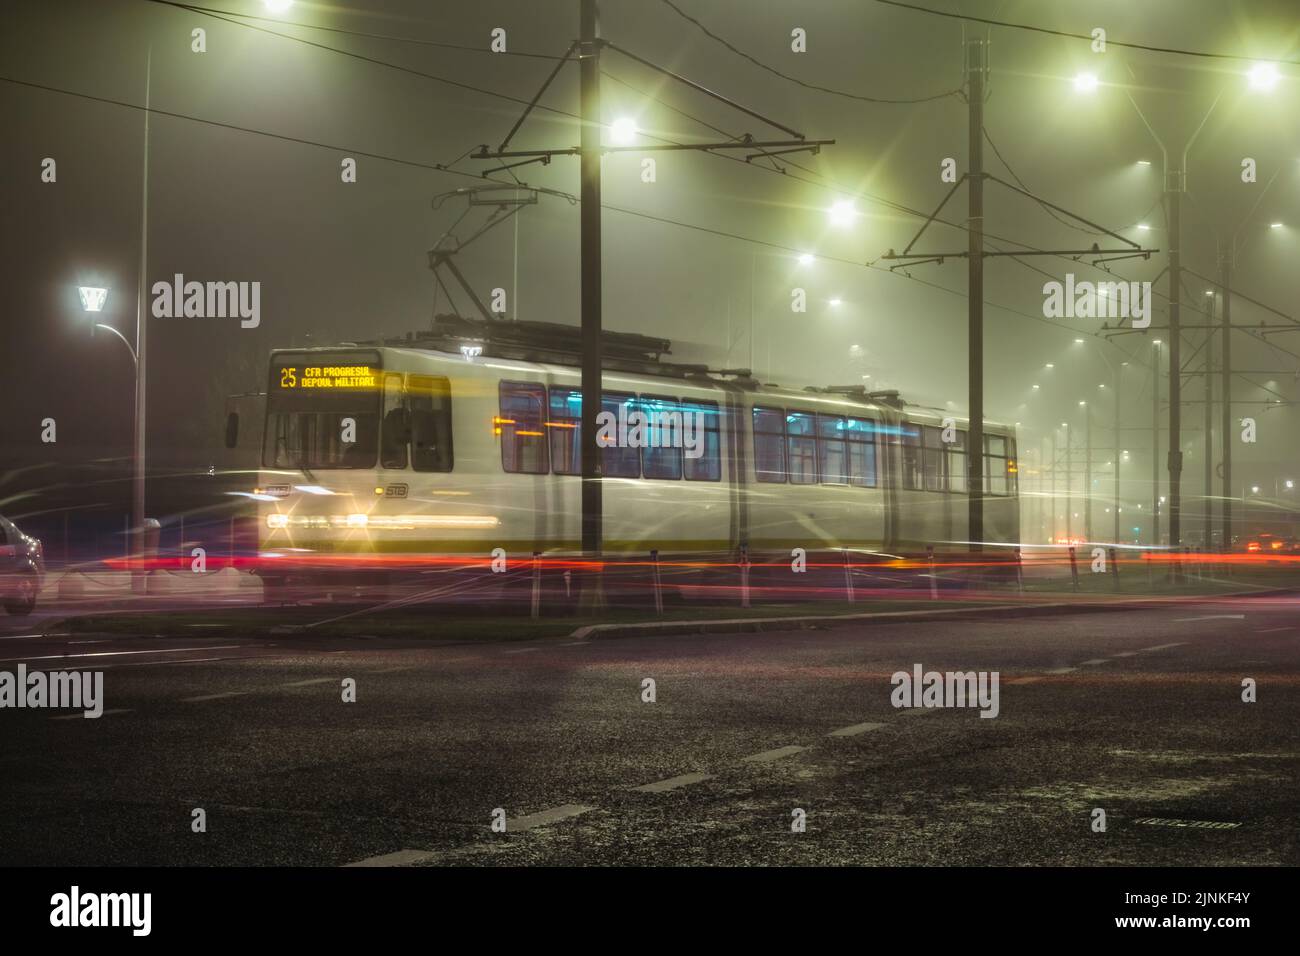 A tram in Bucharest, Romania on a foggy night taken with long exposure Stock Photo